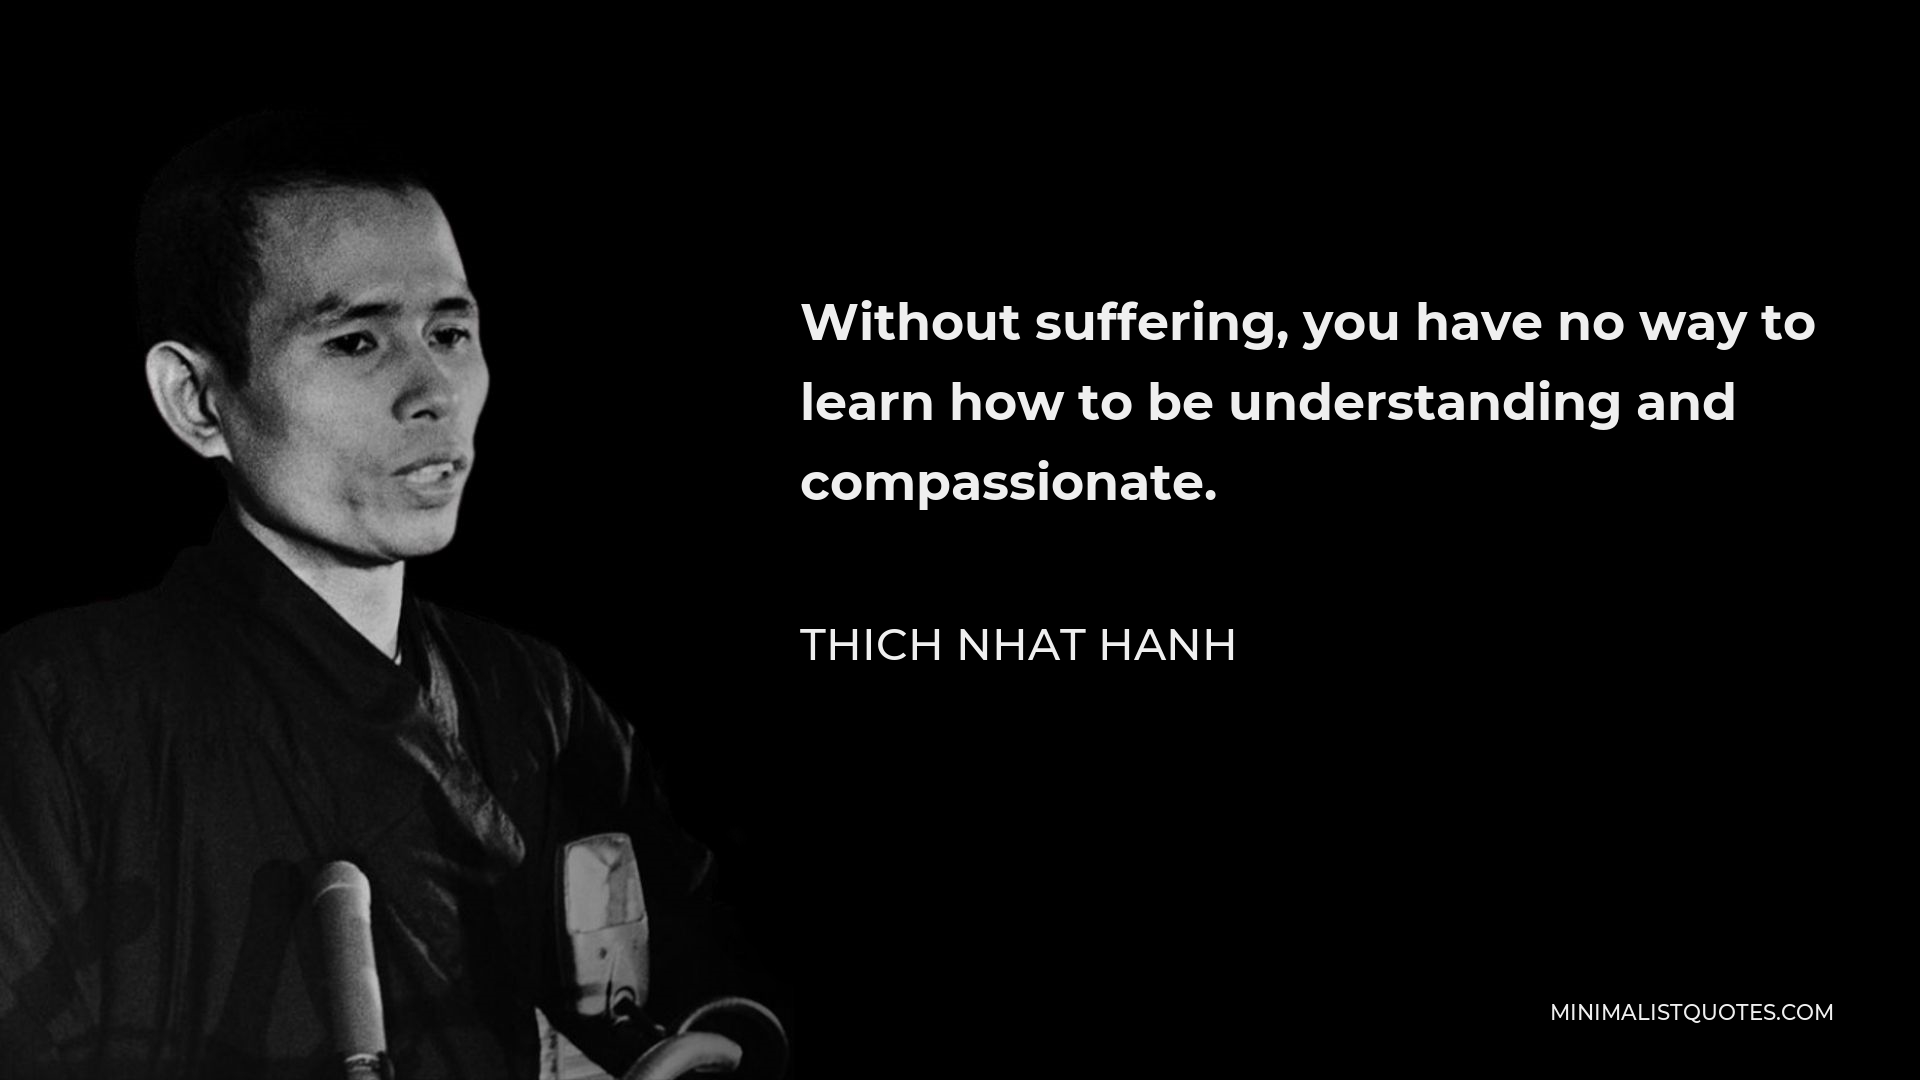 Thich Nhat Hanh Quote - Without suffering, you have no way to learn how to be understanding and compassionate.